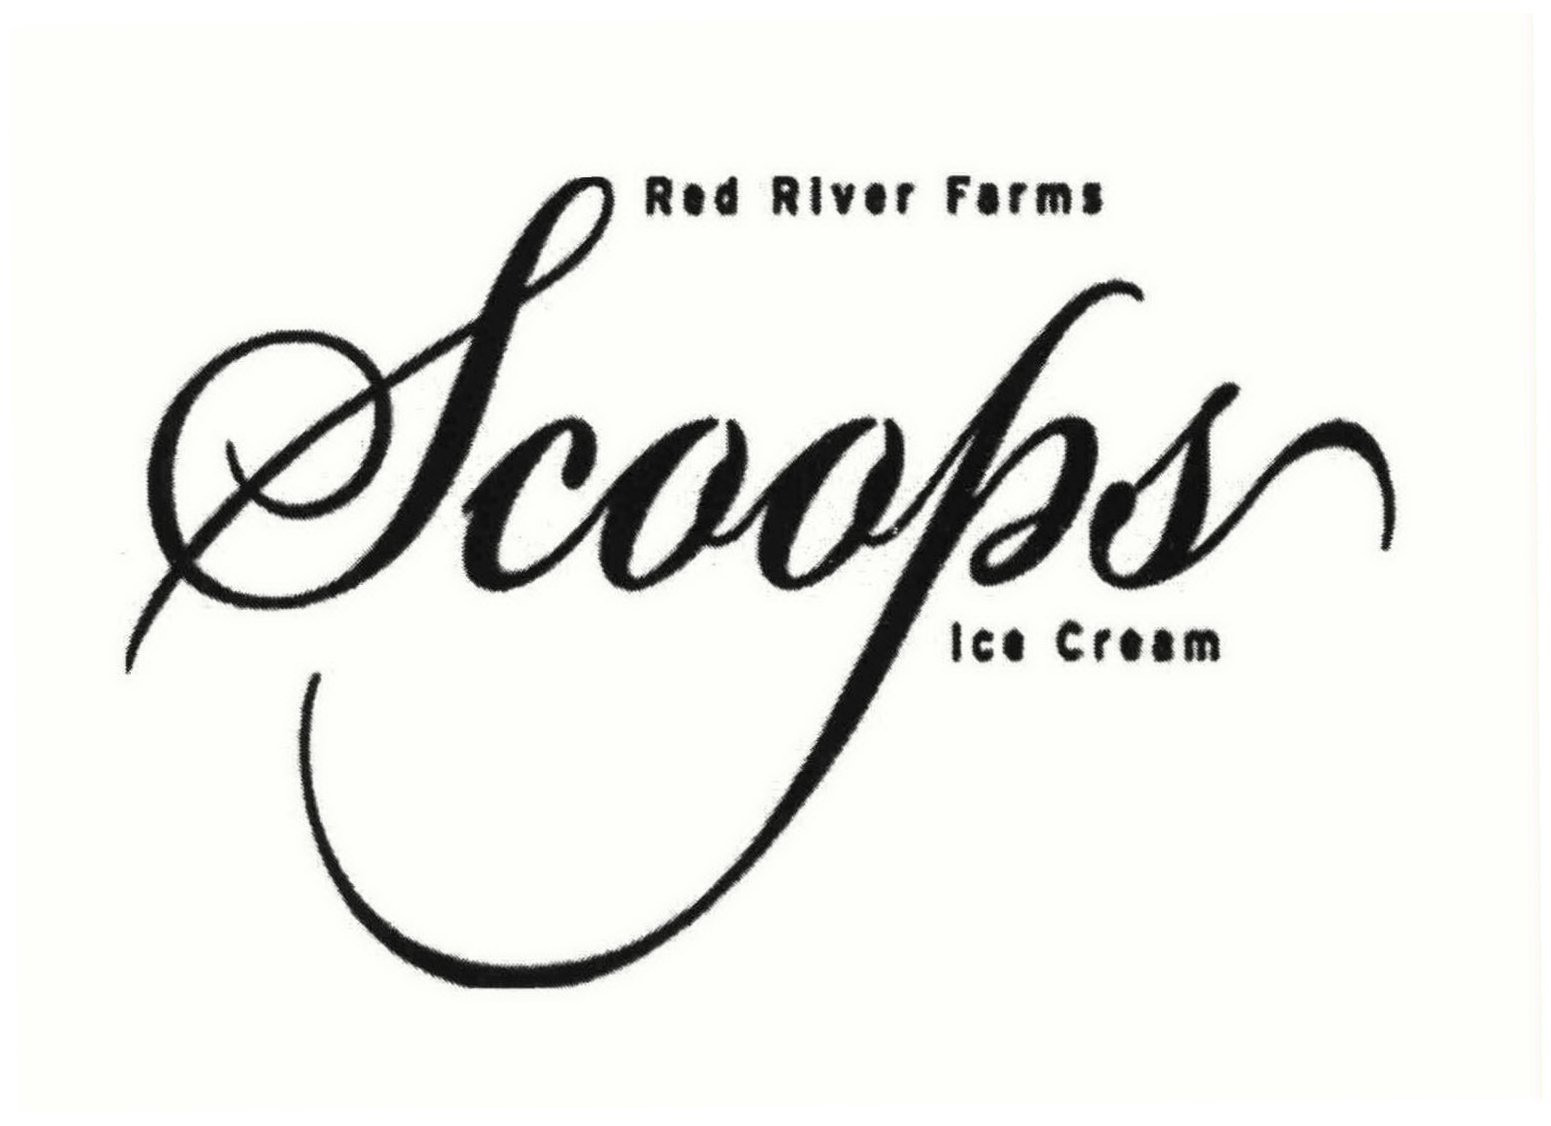  RED RIVER FARMS SCOOPS ICE CREAM